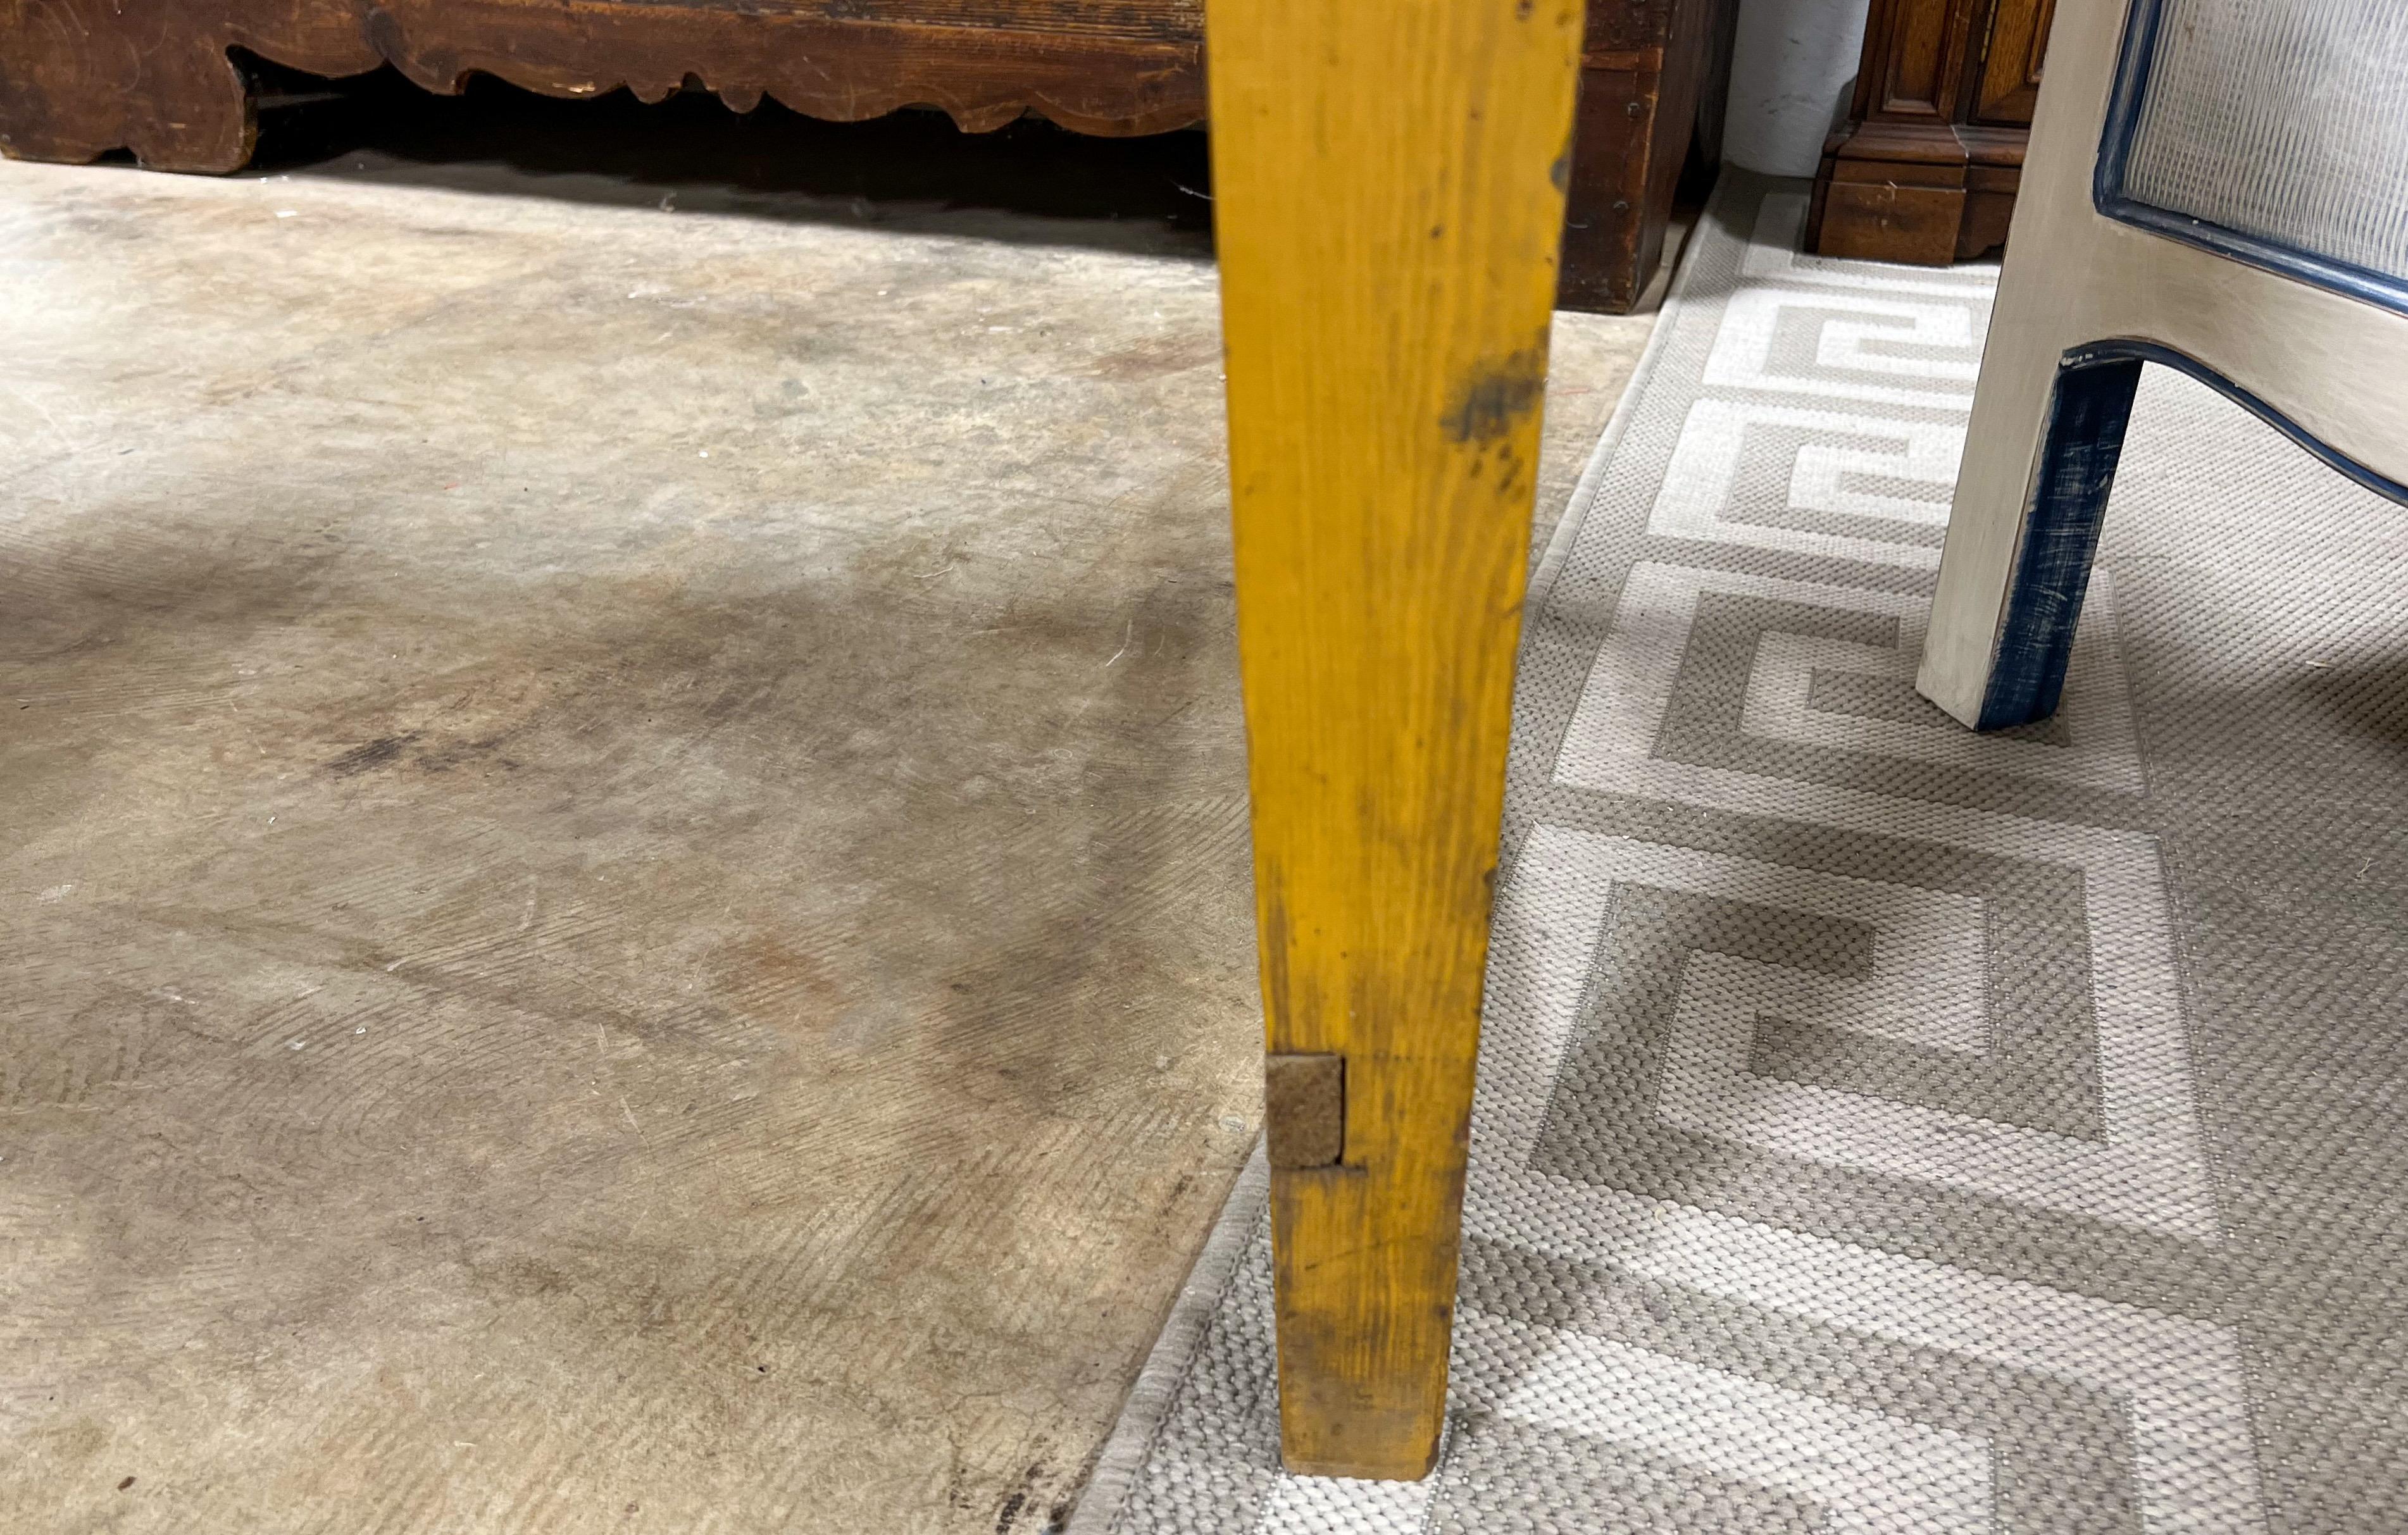 This is a great looking, family friendly farm table. It has wonderful patina with its original mustard paint. It is 26” from floor to apron. It originated in France, and it most likely dates to the later part of the 19th century.

